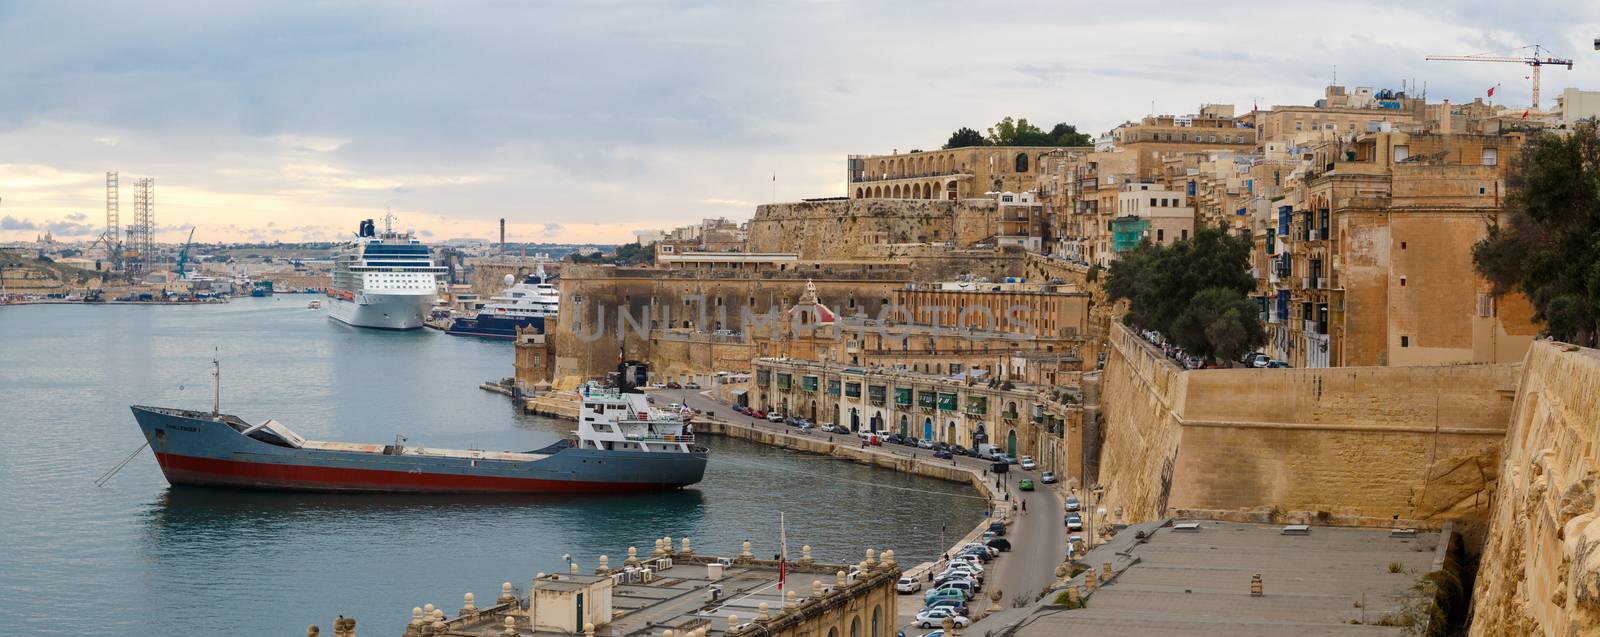 VALLETTA, MALTA - OCTOBER 30, 2015 : View of Valletta with ships and boats on coastline, on cloudy sky background.